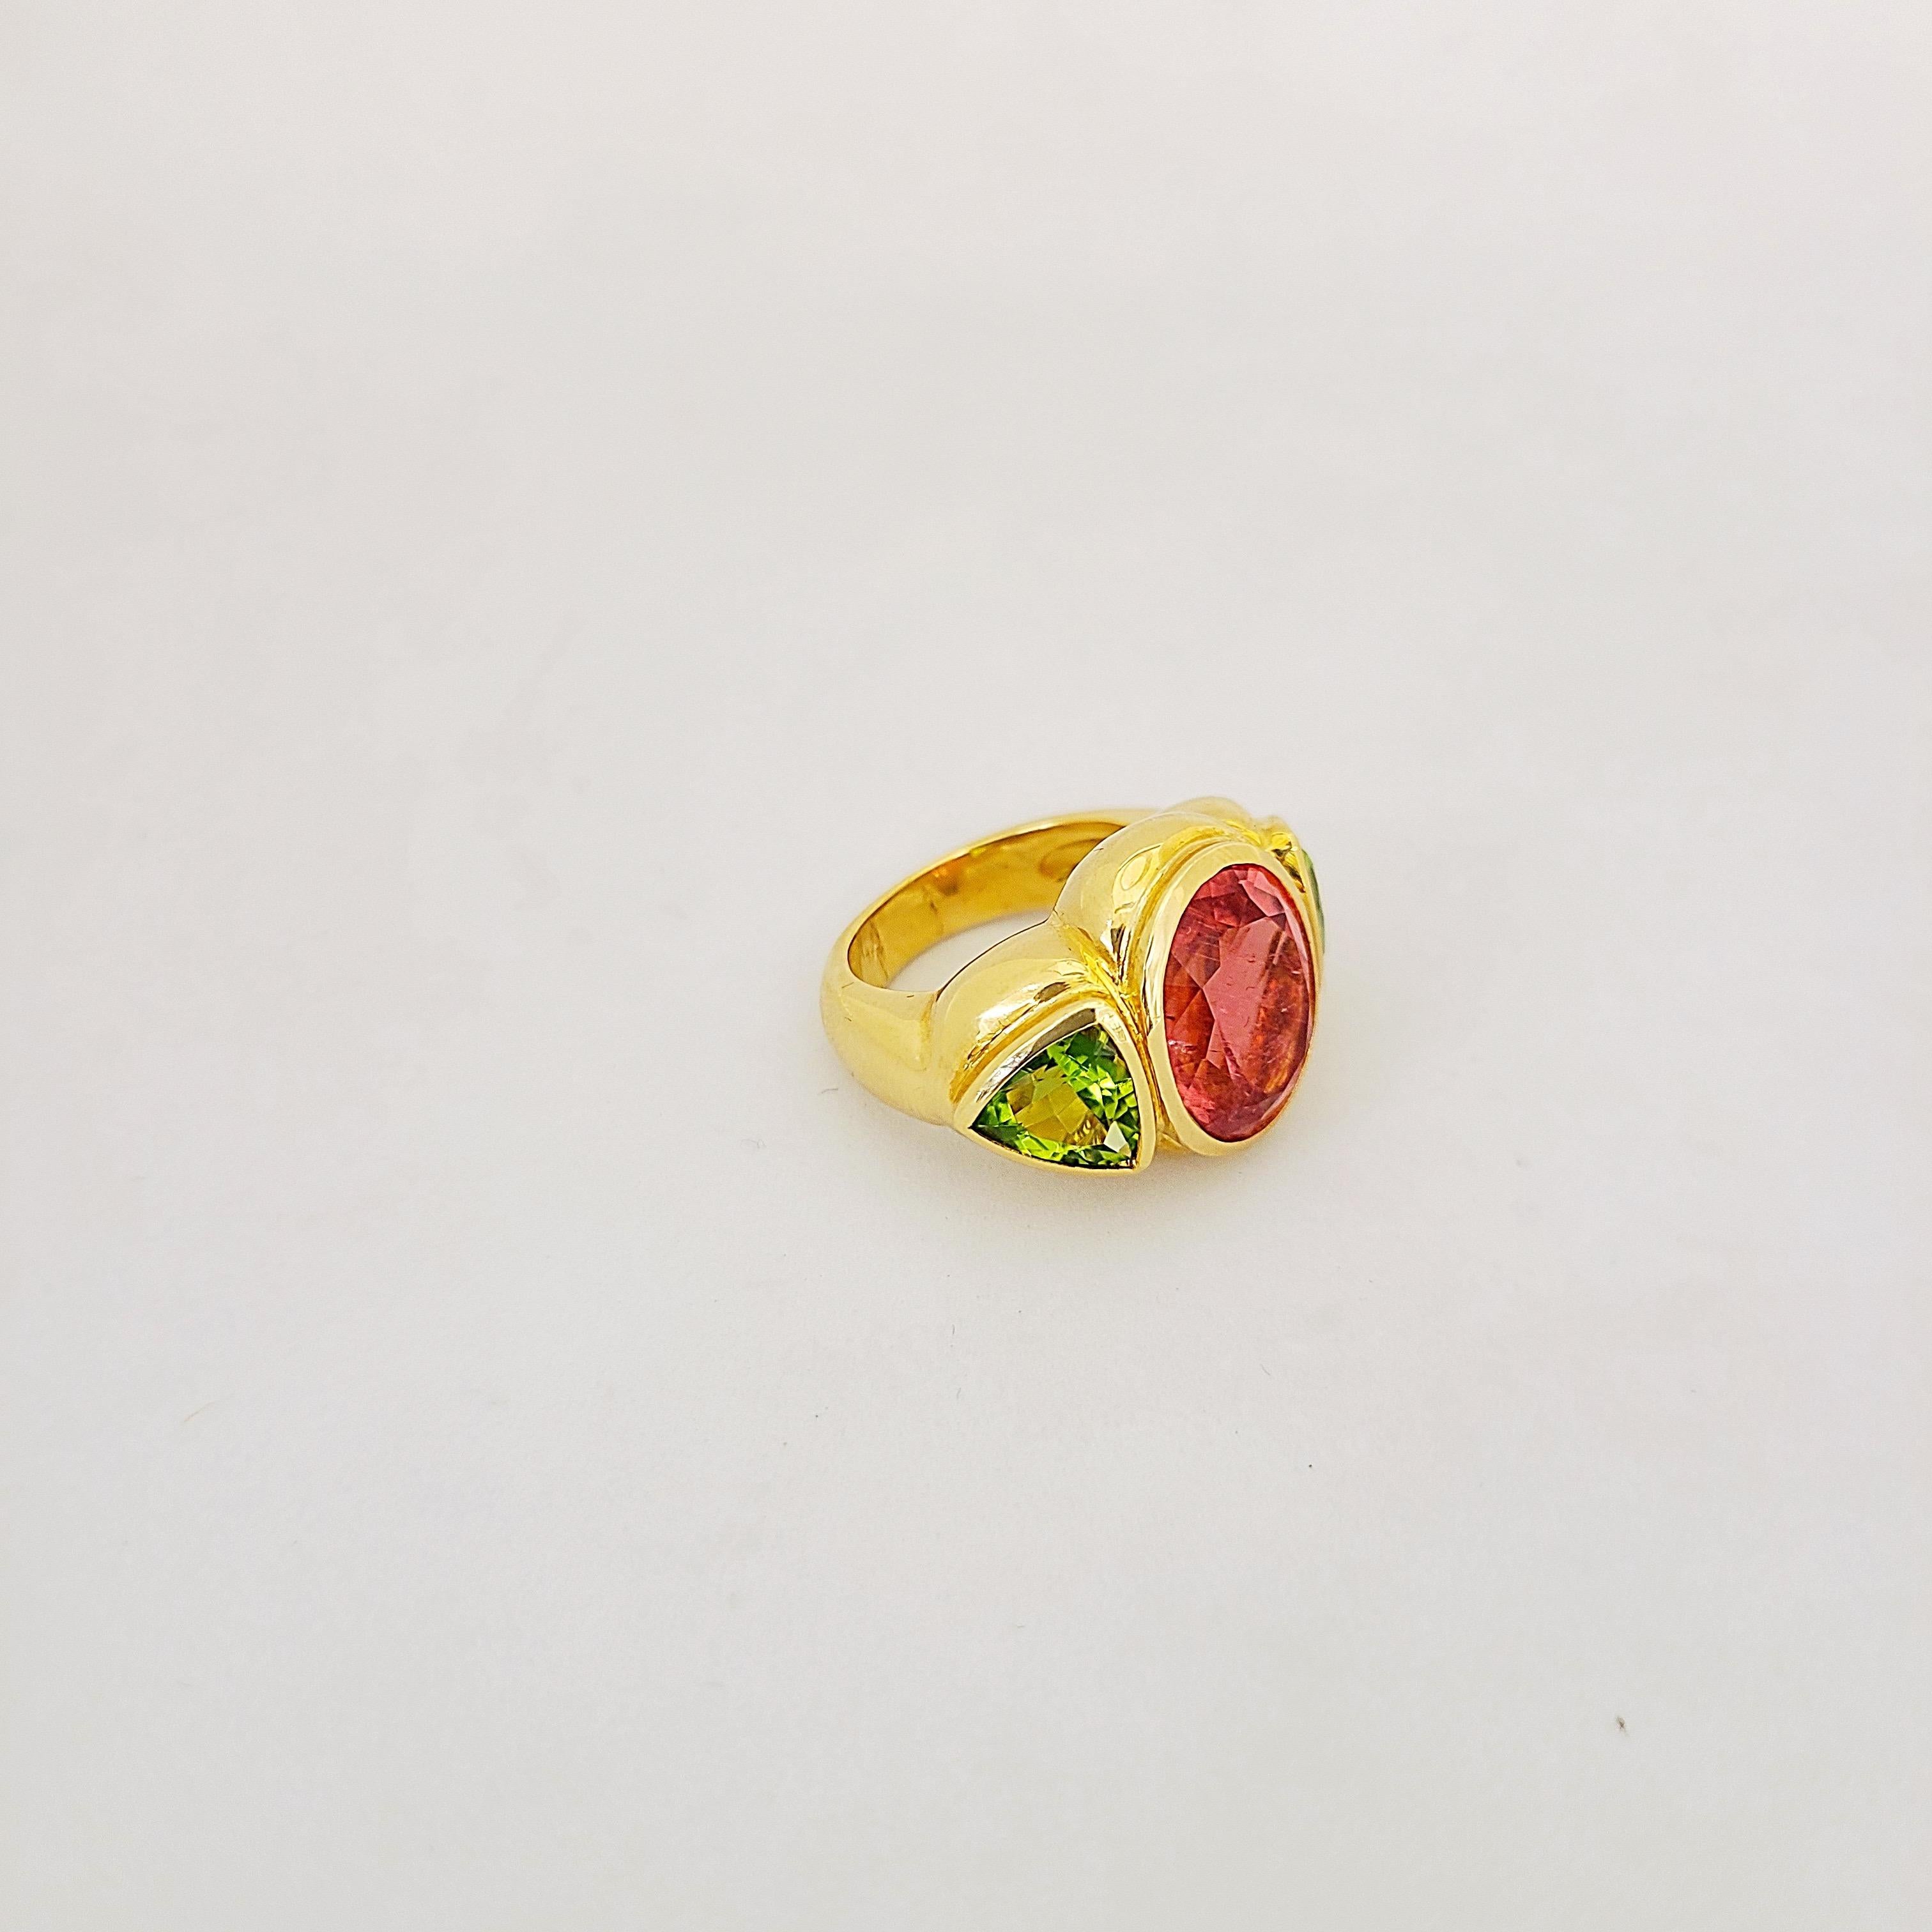 Designed for Cellini this one of a kind ring is set with a oval shaped rubelite center stone flanked by 2  peridot trillion cut stones. Each stone is set in it's own gold bezel in this lovely handmade mounting.
Rubelite total 8.05 carats
Peridot